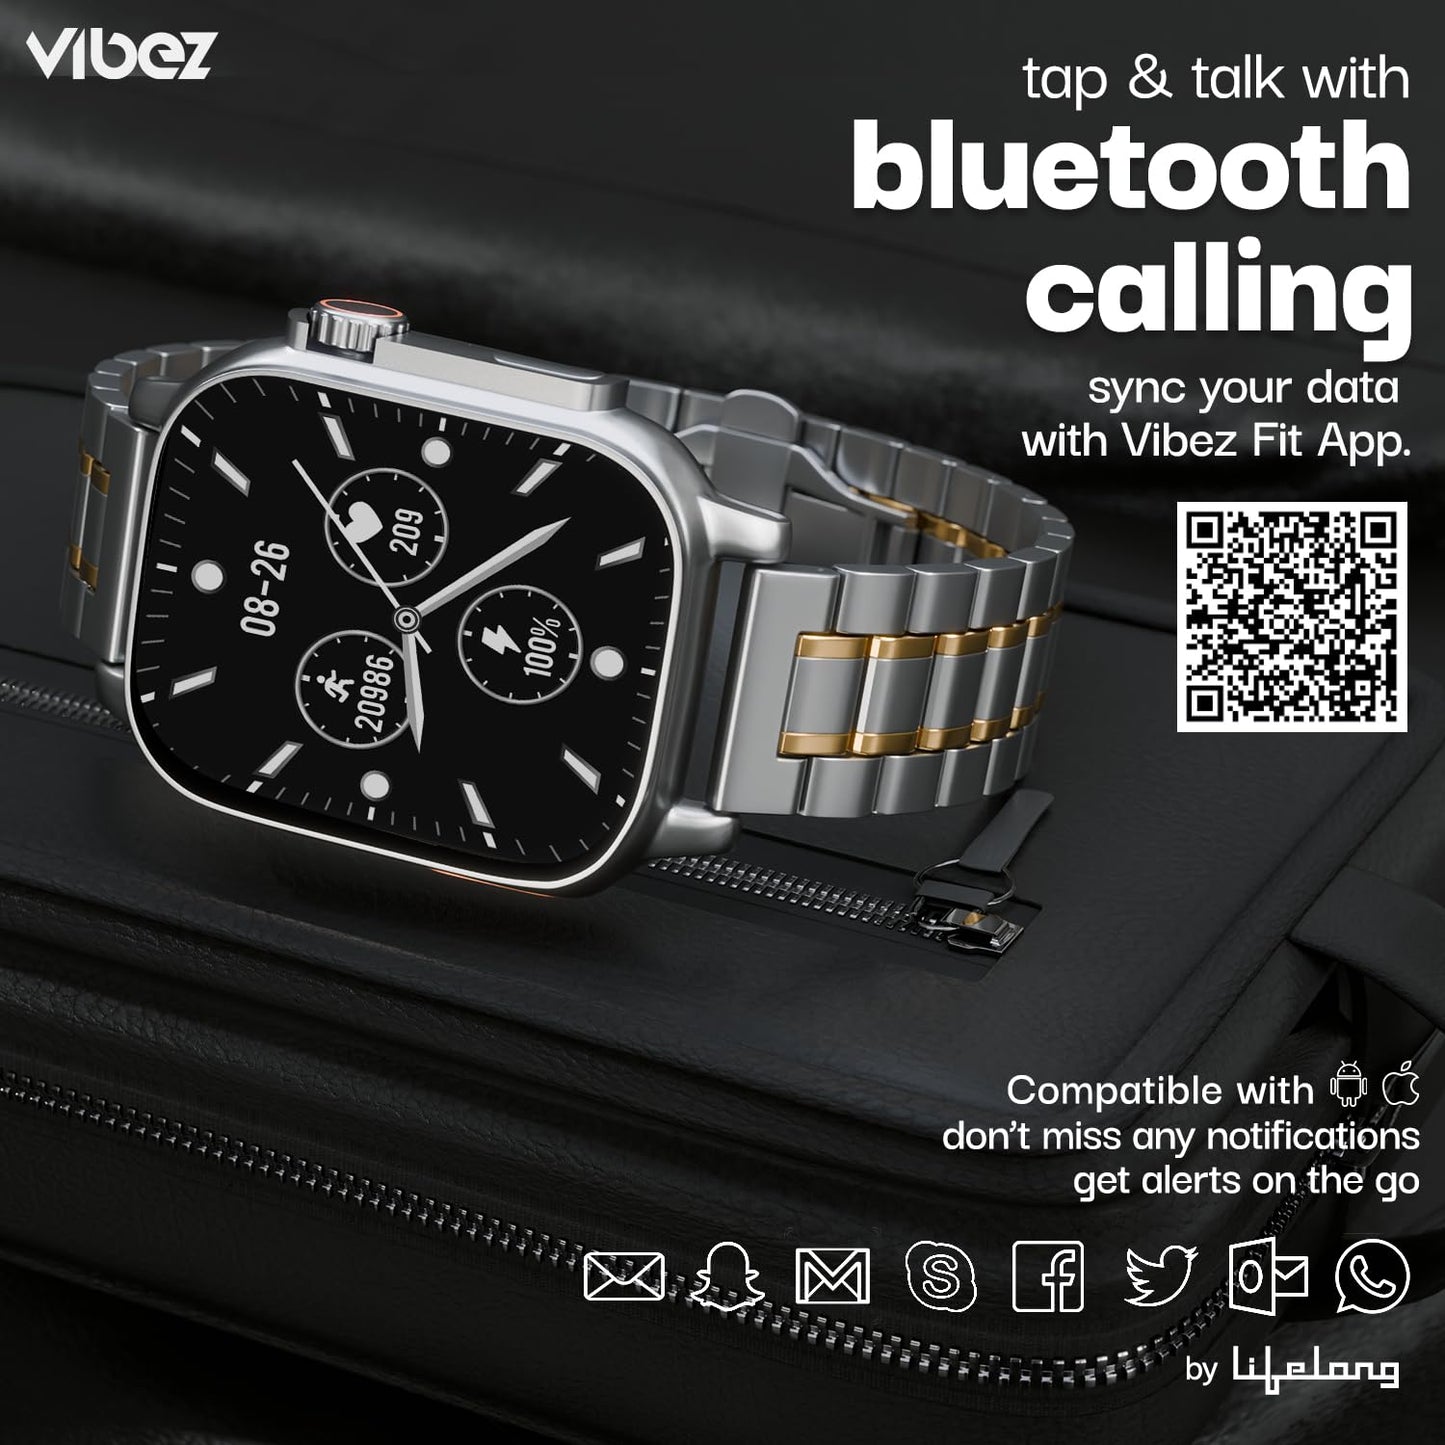 Vibez by Lifelong New Launch Smart Watch for Men -60 Day Battery 950mAH -2.02” Ultra HD Display & 900 NITS Men's Smartwatch -Stainless Steel Dial & BT Calling (Pacific, Silver-Gold)